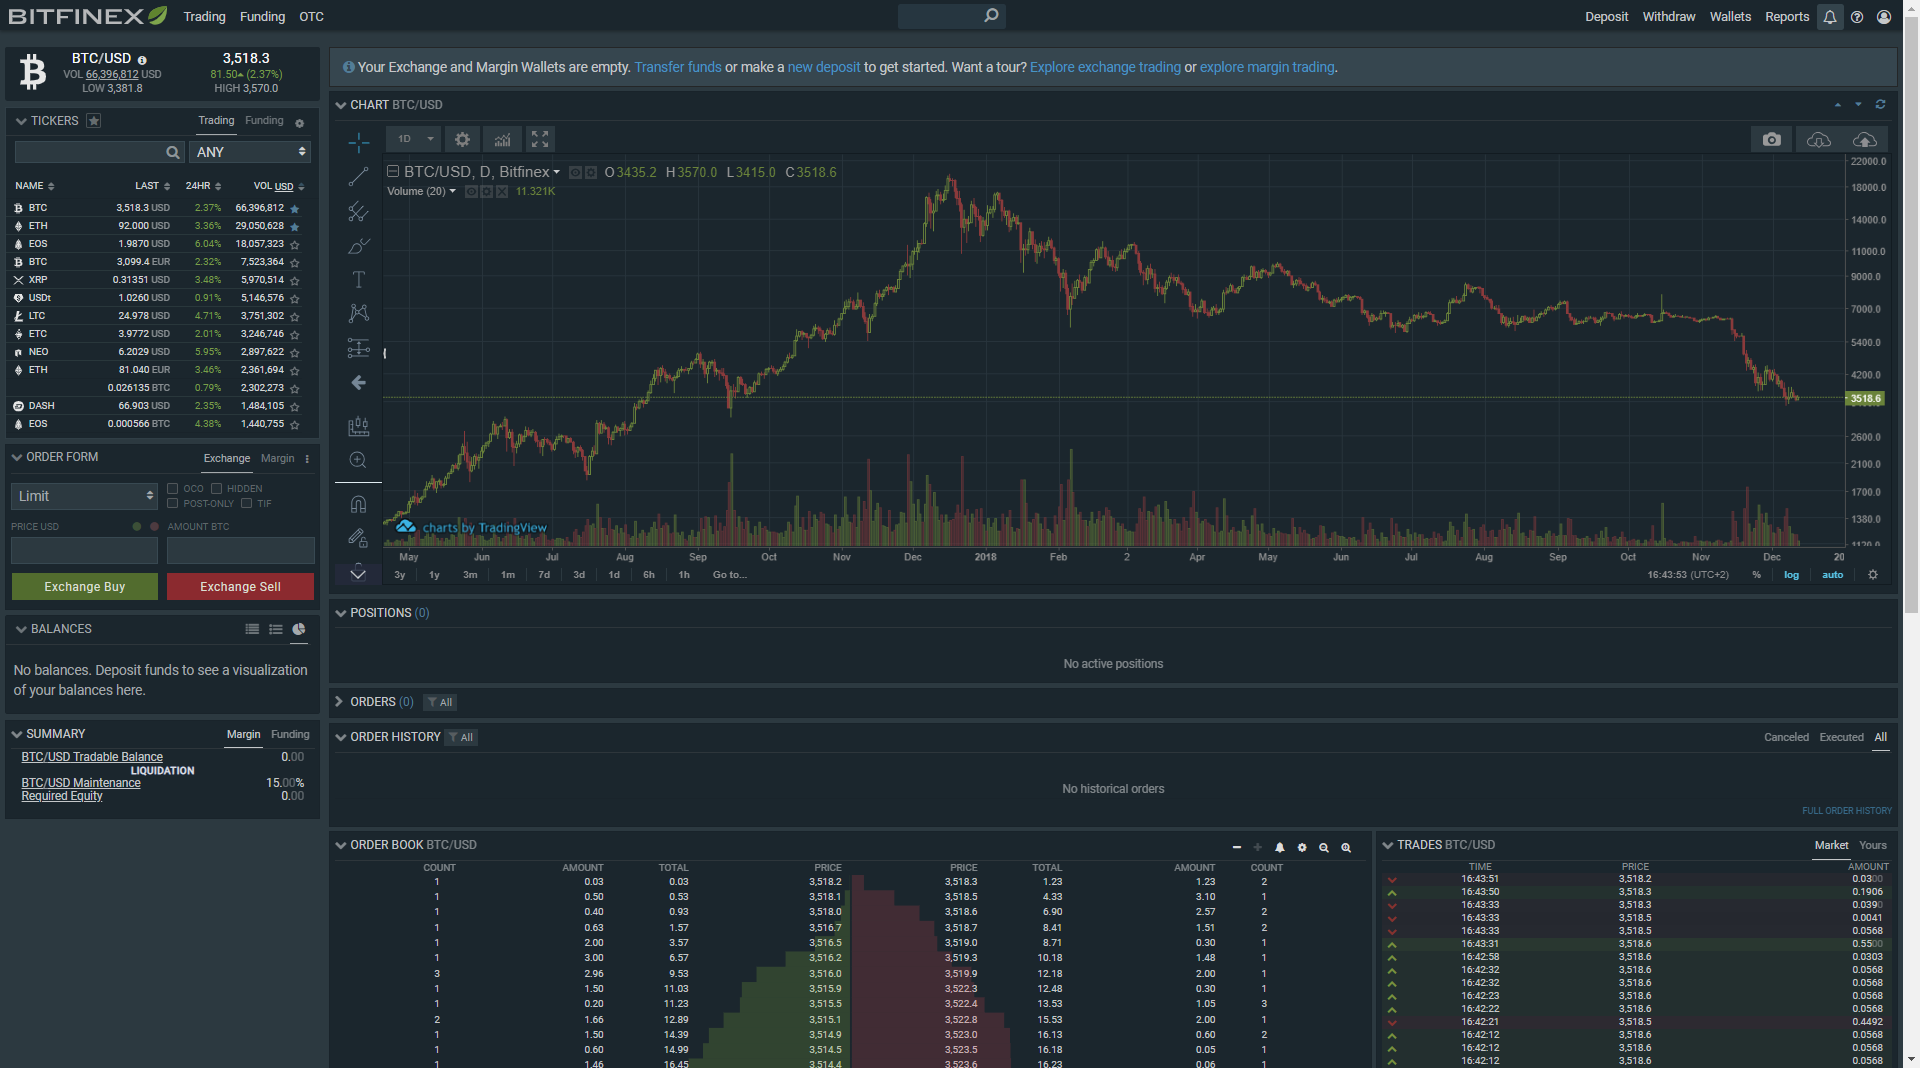 Bitfinex’s homepage and trading interface 